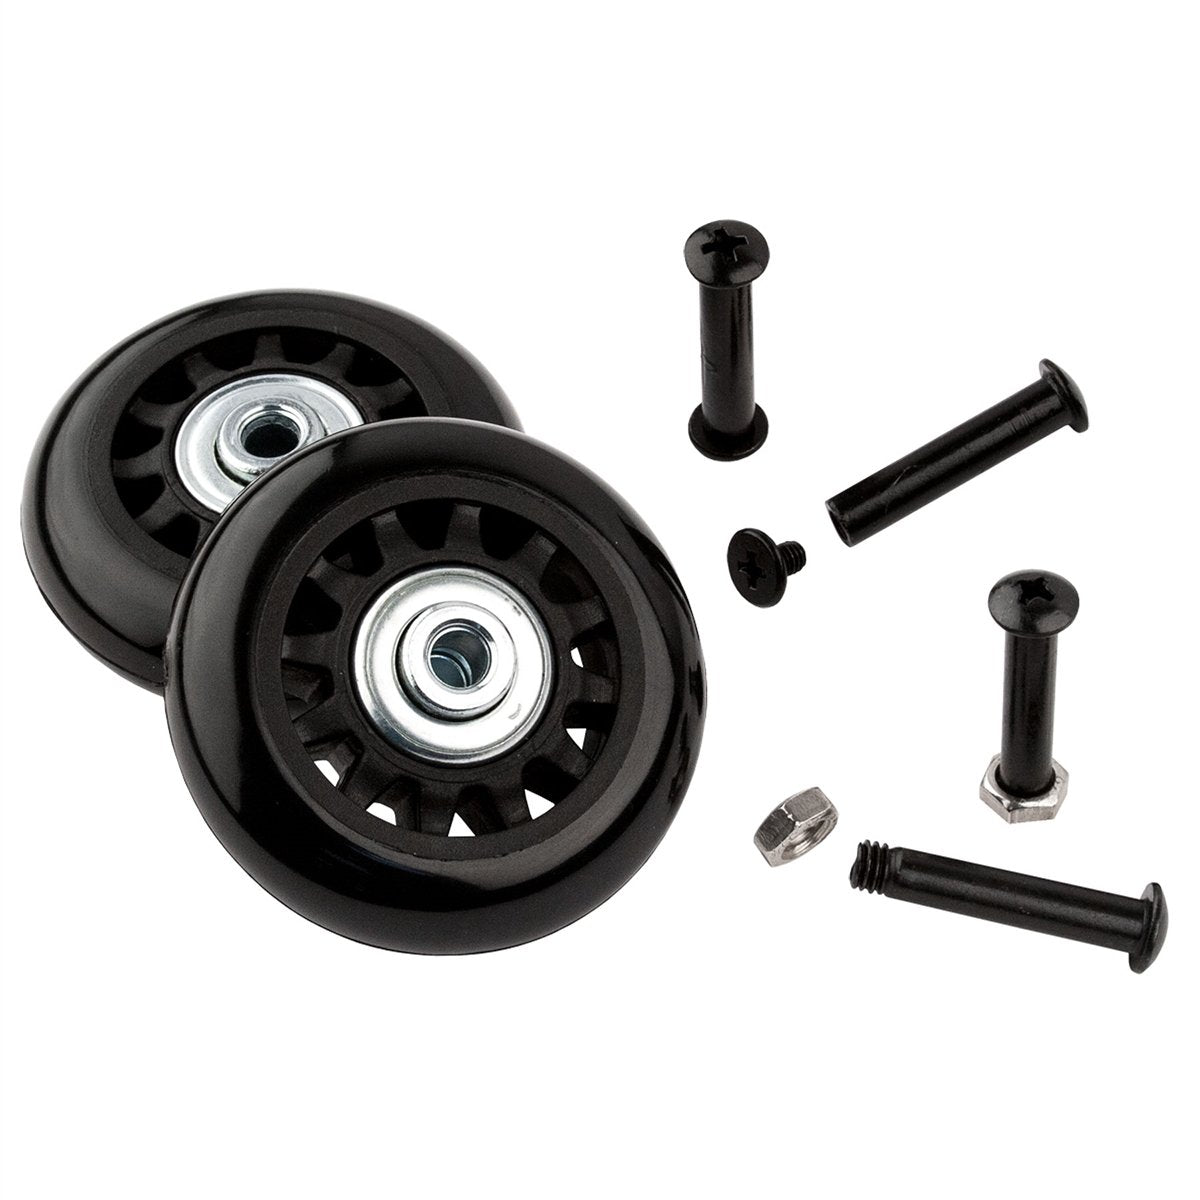 Protec - Replacement In-Line Skate Wheels for Cases-Case-Protec-Music Elements